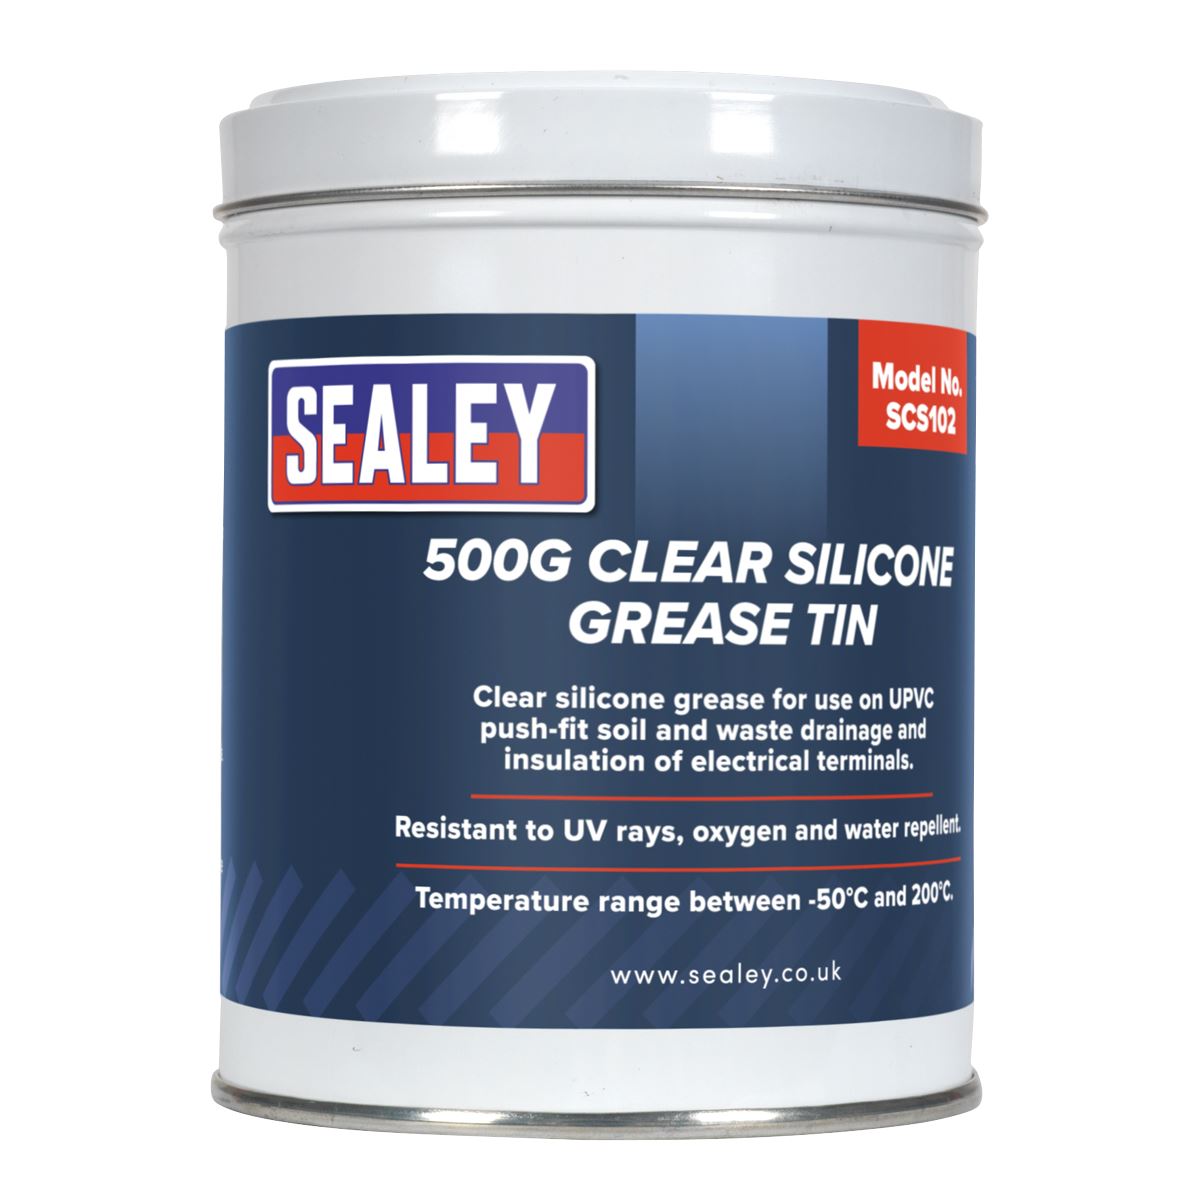 Sealey Silicone Clear Grease 500g Tin